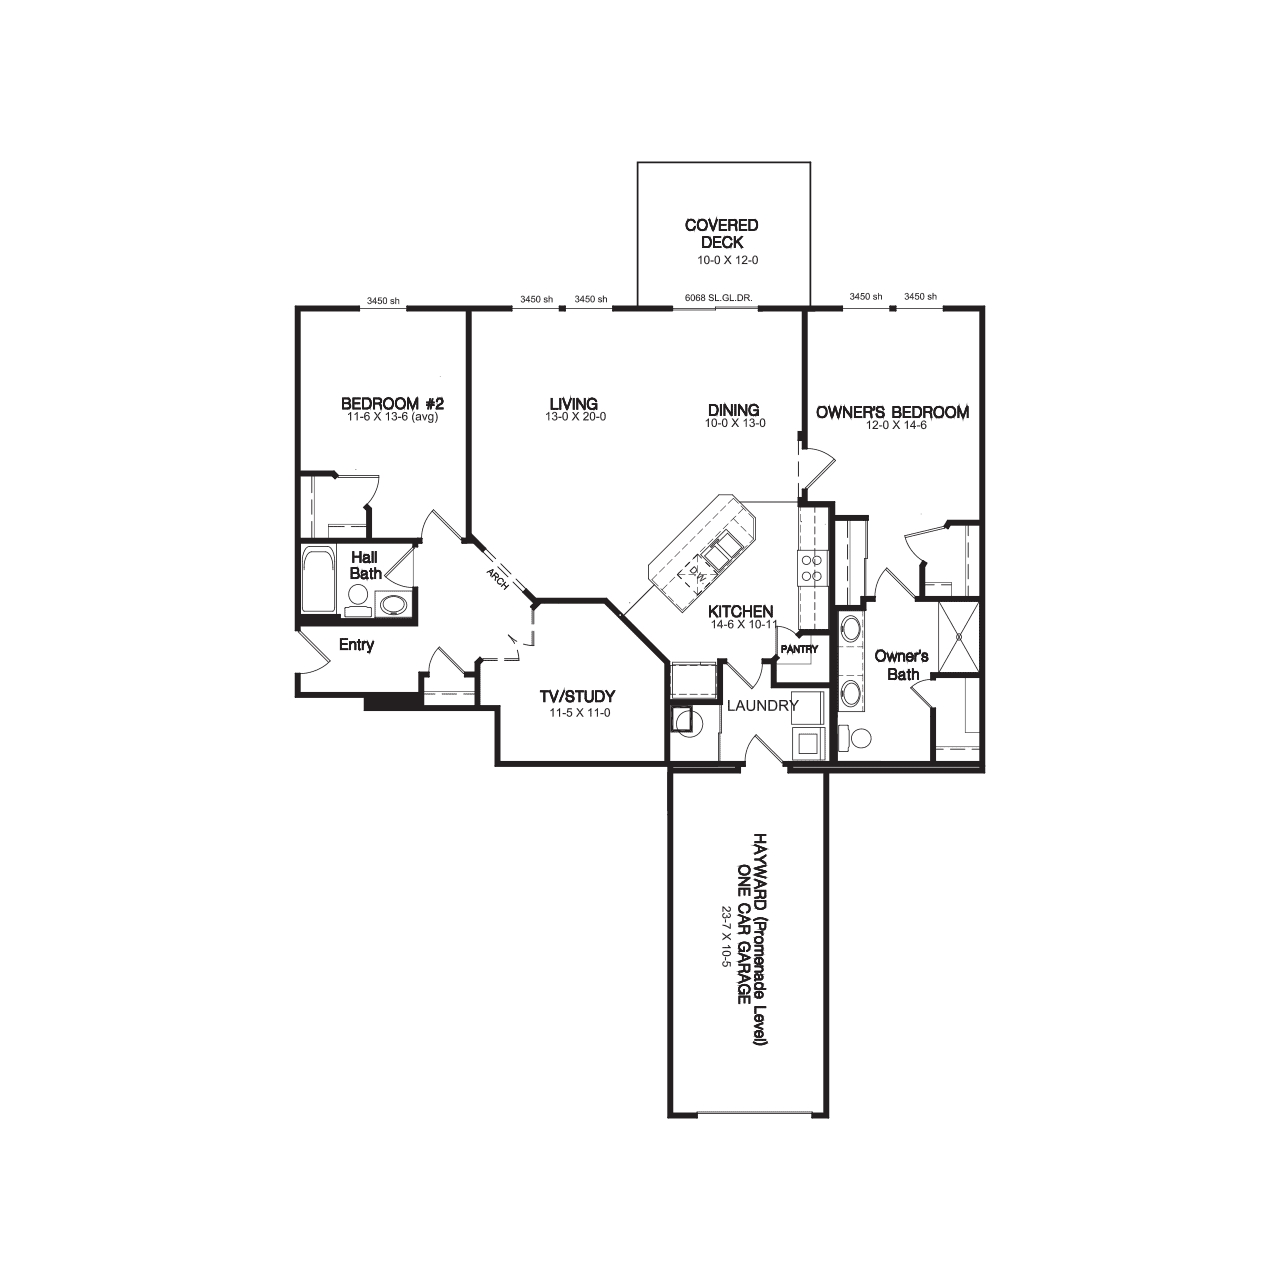 8 Images Fischer Homes Floor Plans And Review Alqu Blog